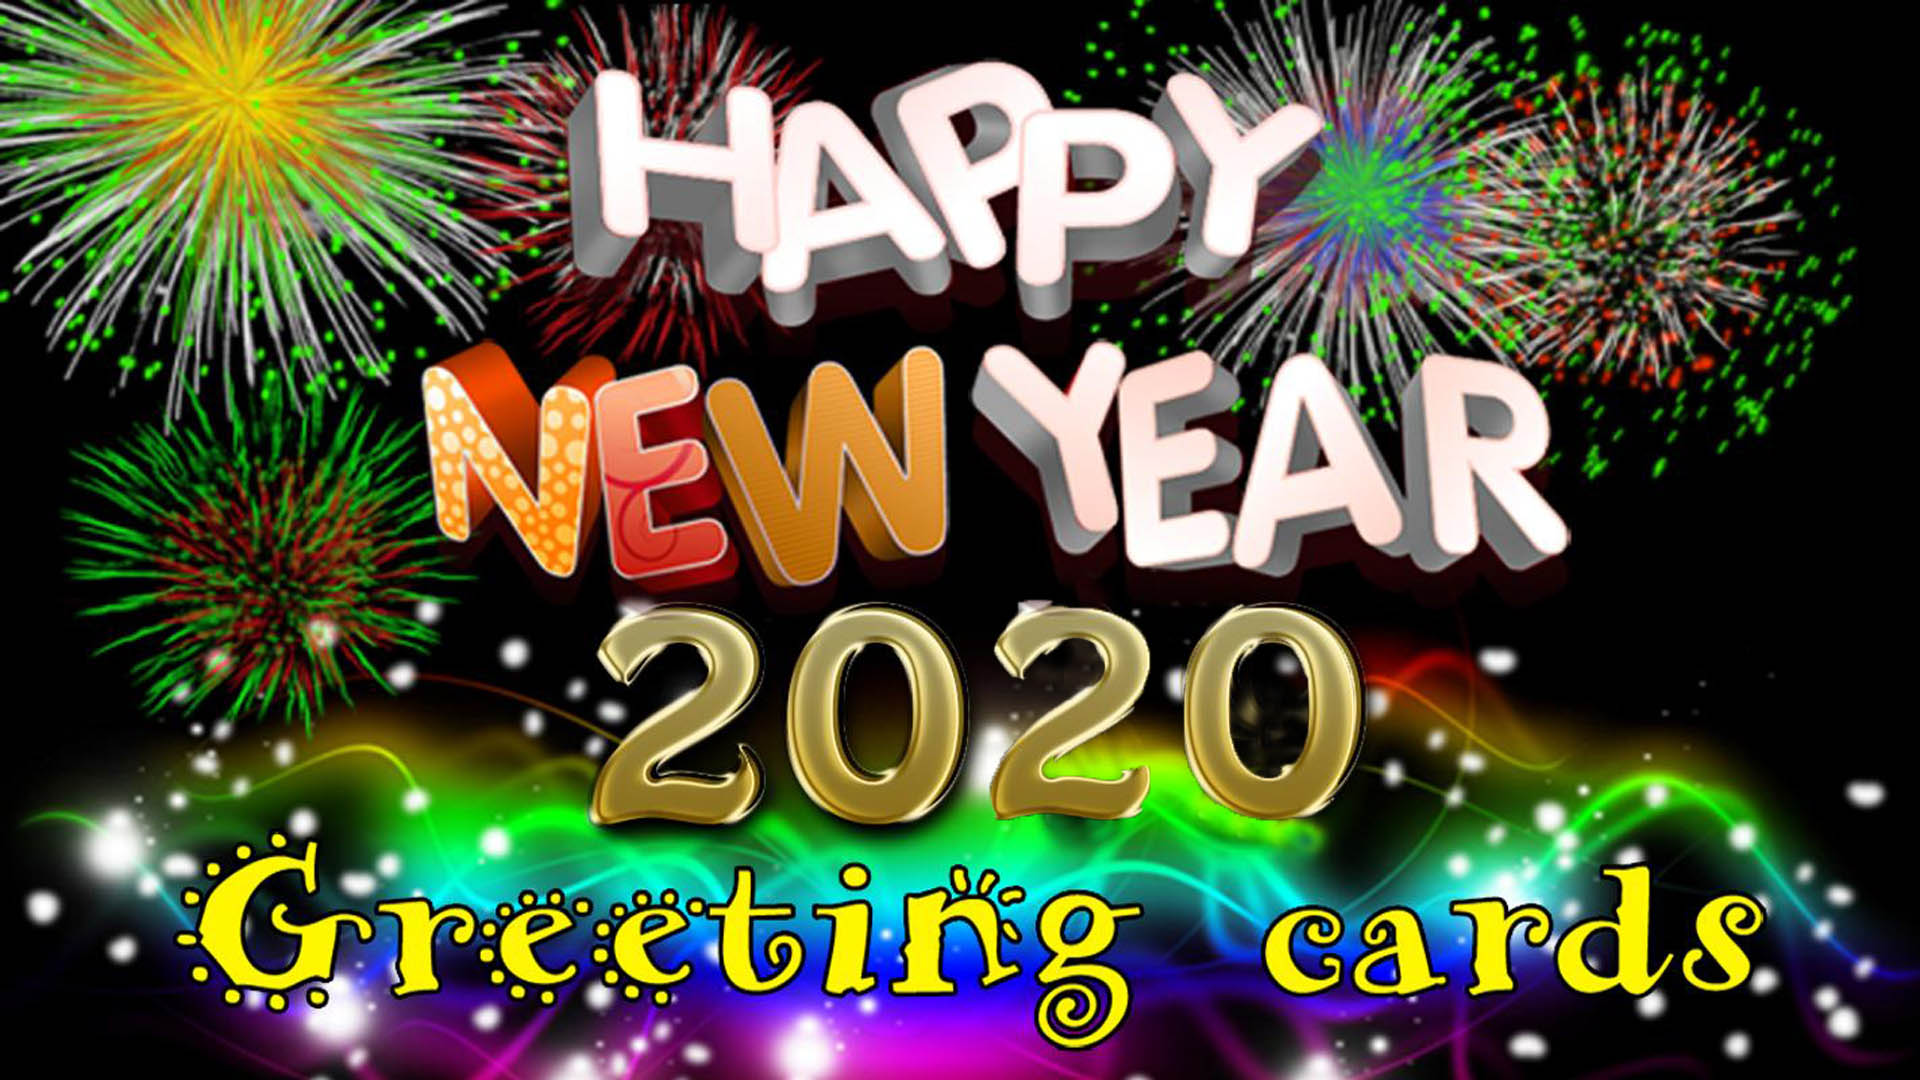 Happy New Year 2020 Greetings Cards Desktop Wallpaper Hd For